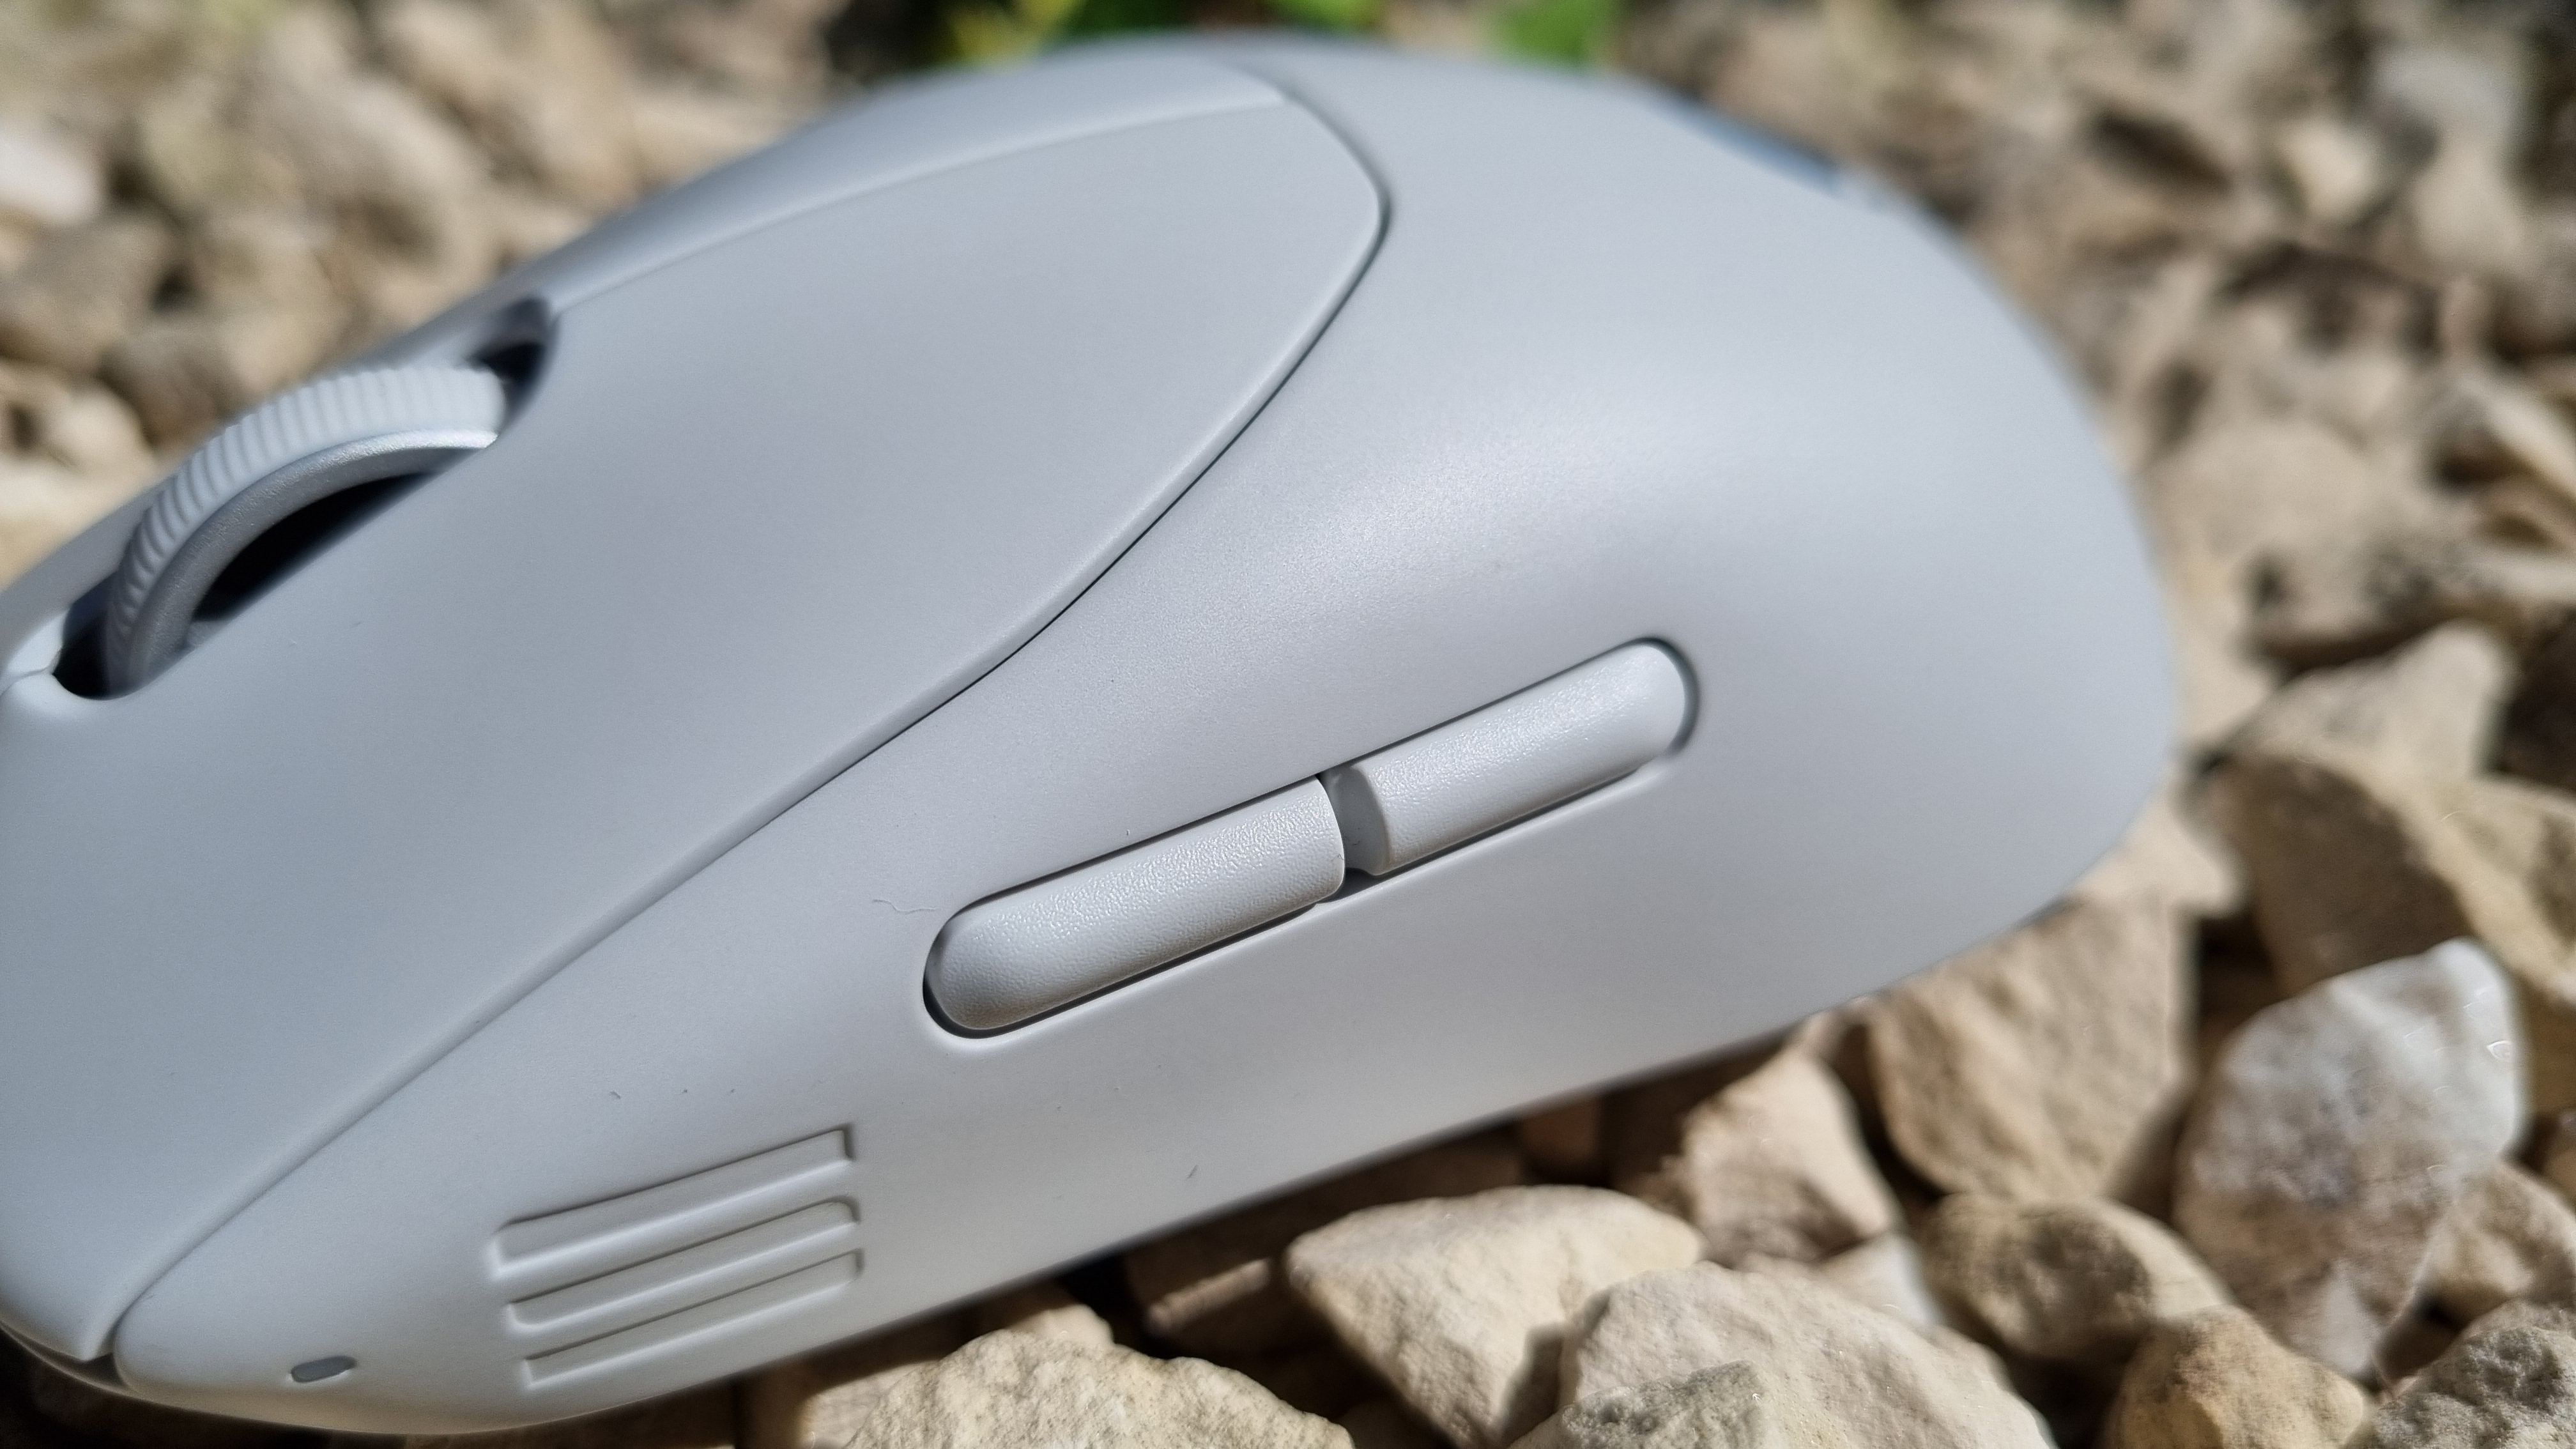 The side buttons of the Alienware Pro Wireless Gaming Mouse